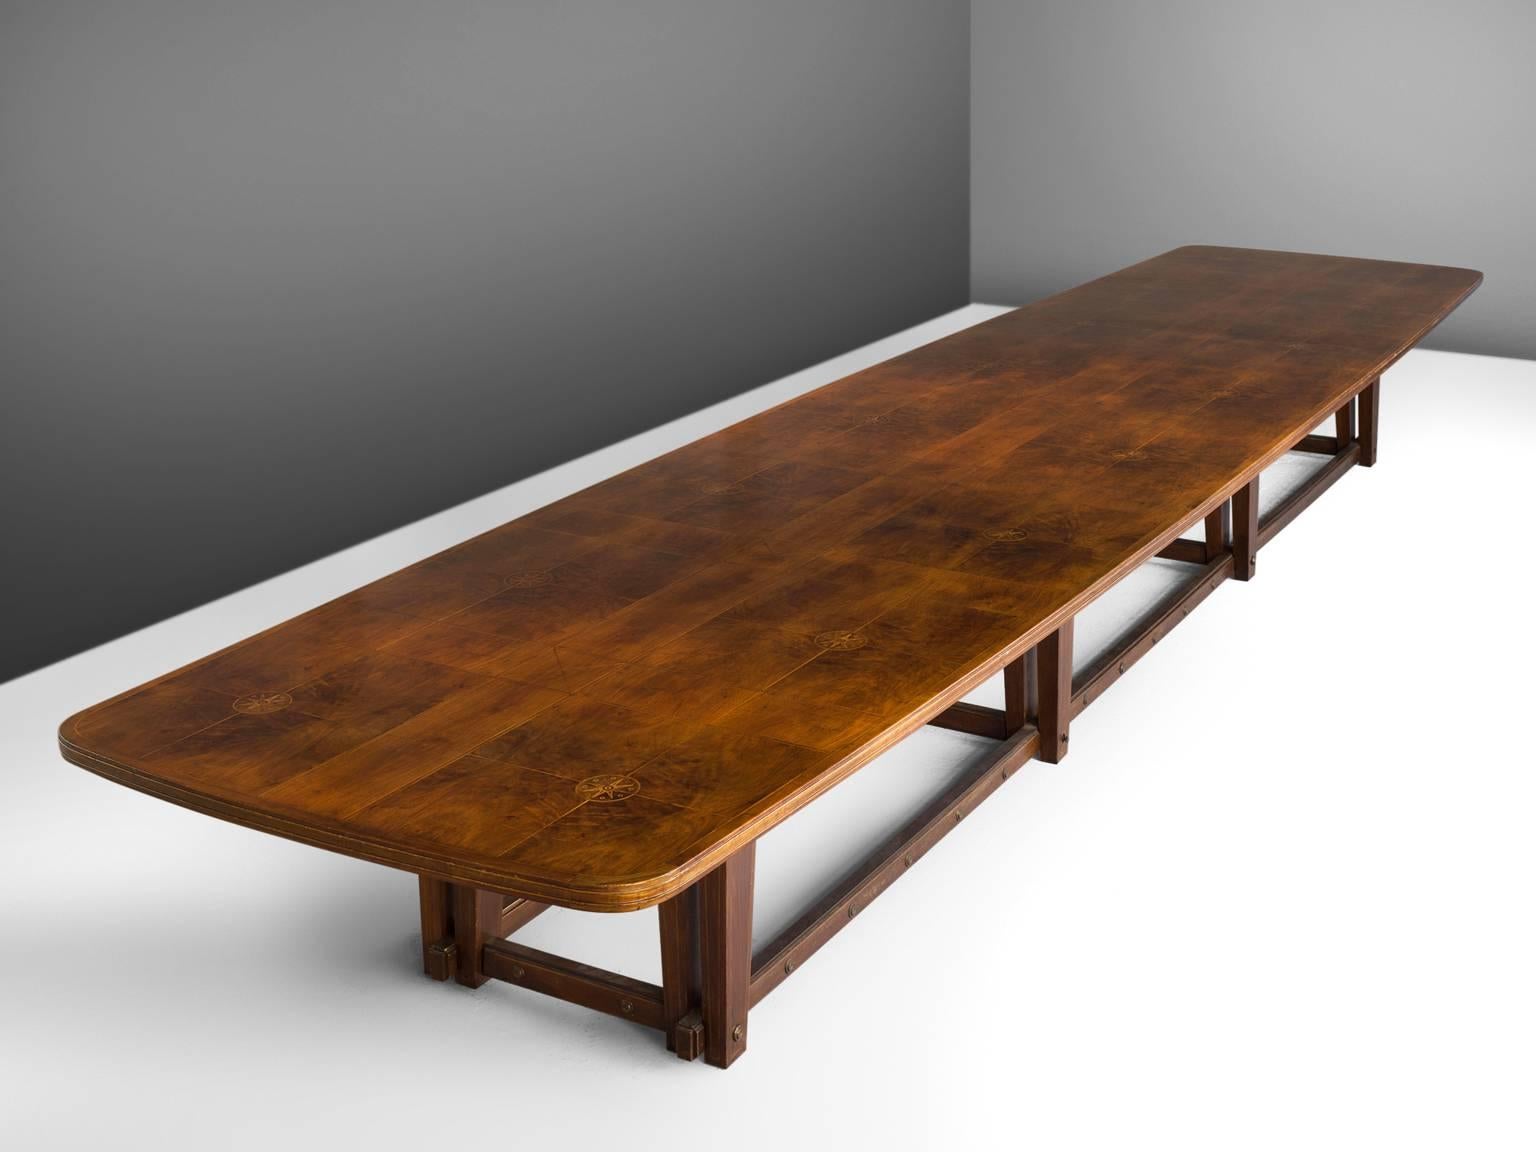 Conference table, in walnut, Europe, 1950s.

Extremely large conference table in walnut. The top show beautiful inlaid wood. A geometric pattern is created due horizontal and vertical lines. Replenished with the illustration of compass-card. The